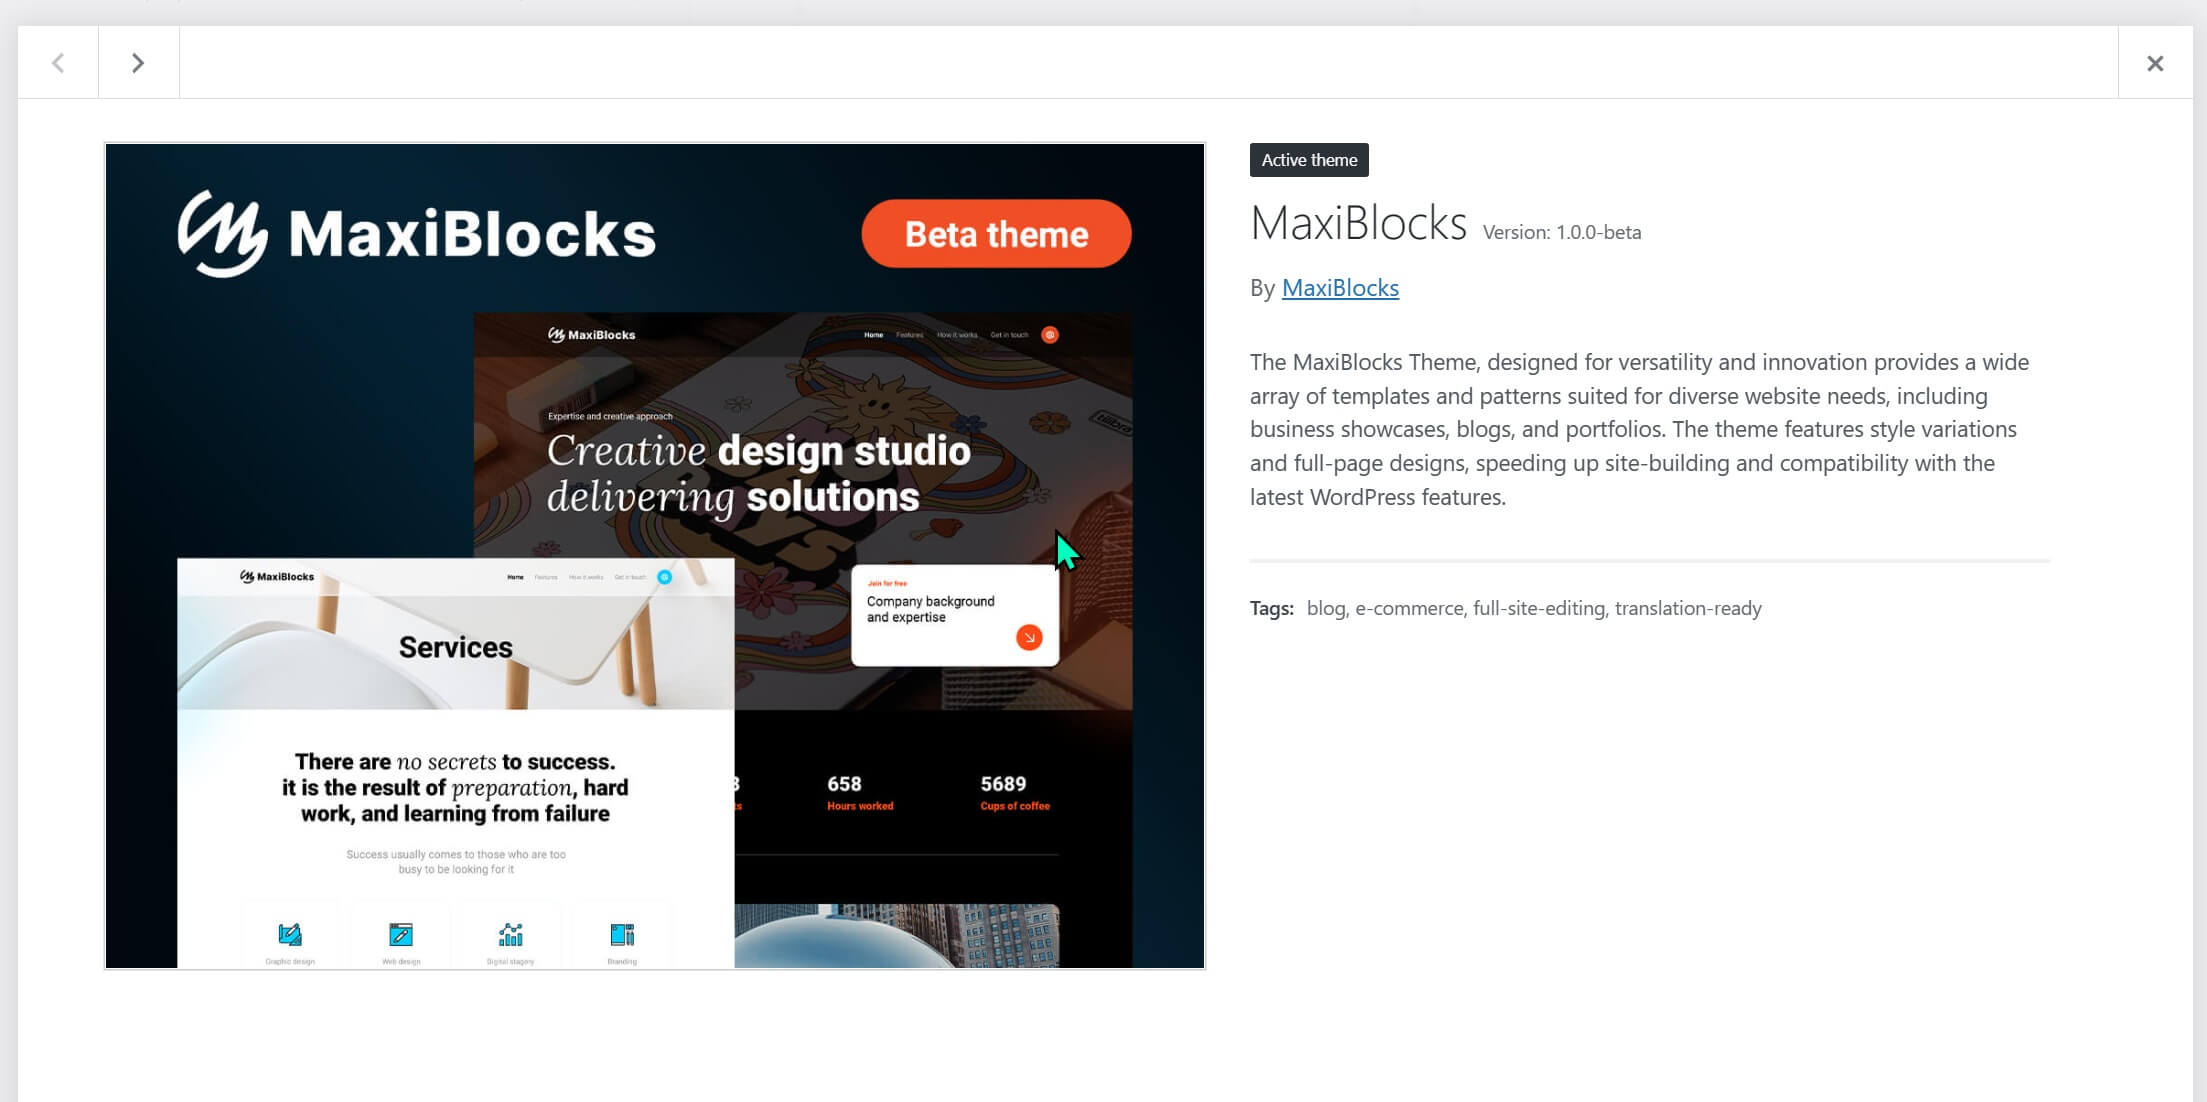 A close-up view of a theme information card for 'MaxiBlocks', which is a beta version WordPress theme. The card shows a thumbnail of the theme's design featuring dark tones with orange accents and descriptive text outlining the theme's features such as versatility, innovation, and compatibility with the latest WordPress features.